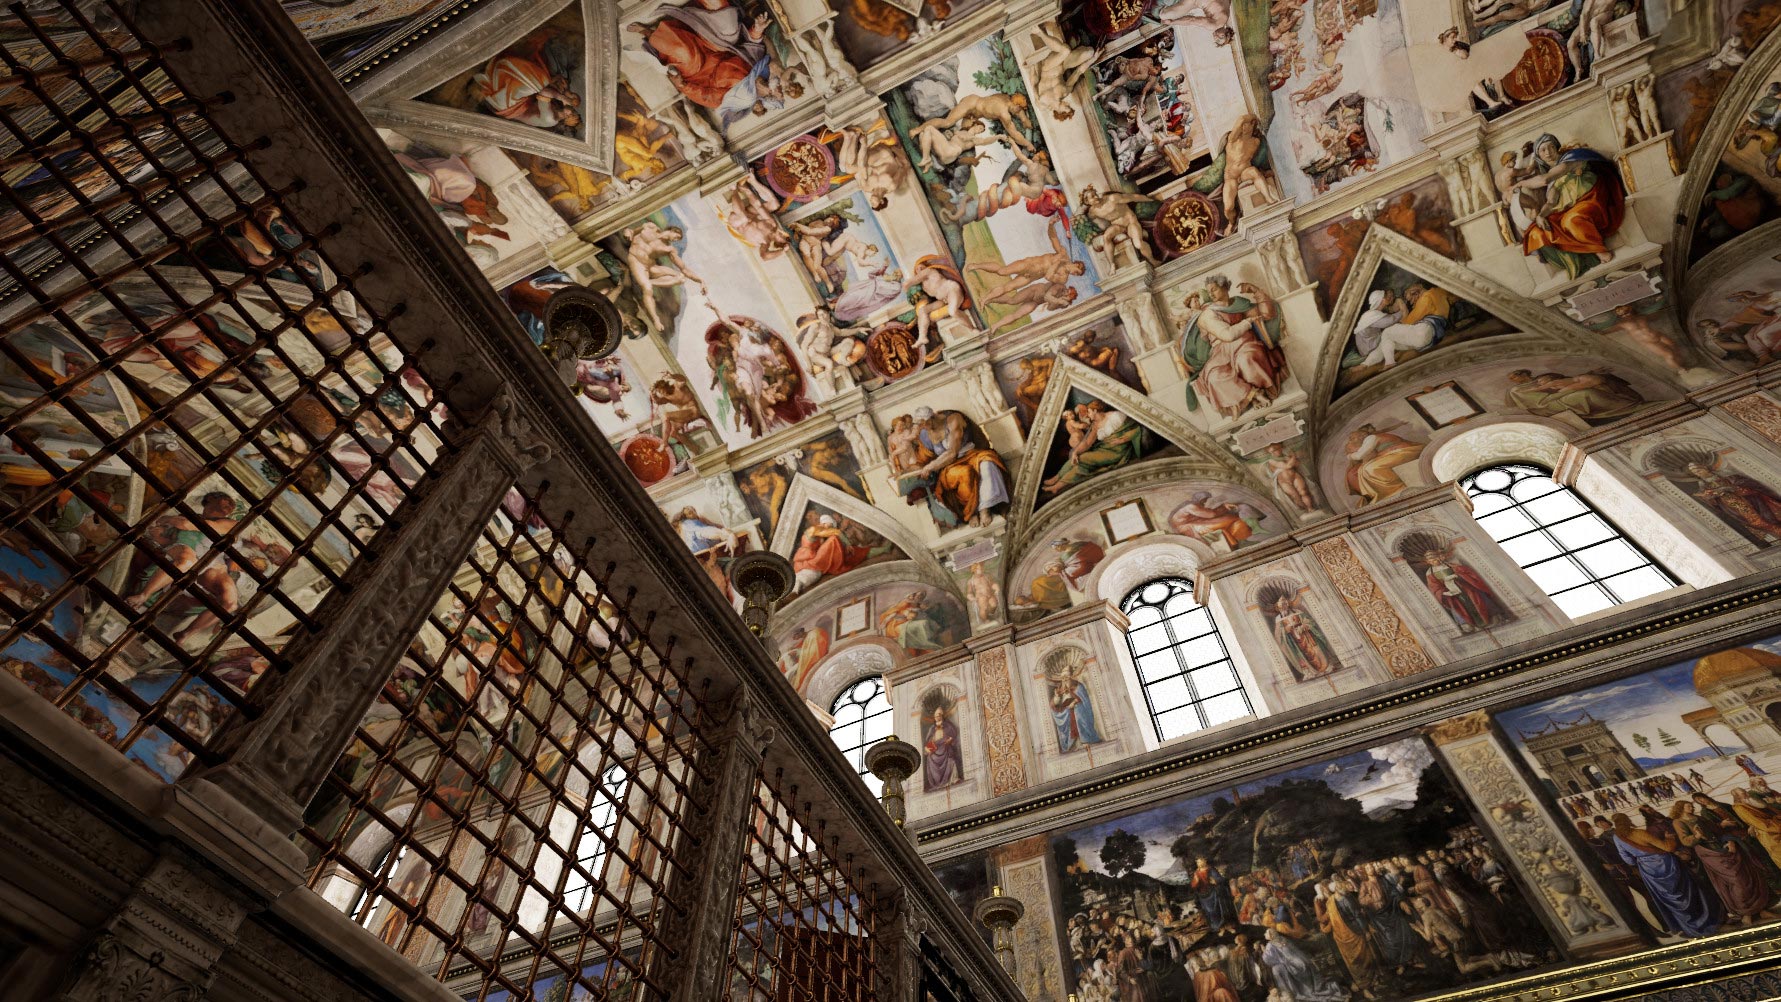 Vr Recreation Of The Sistine Chapel Is Now Available On